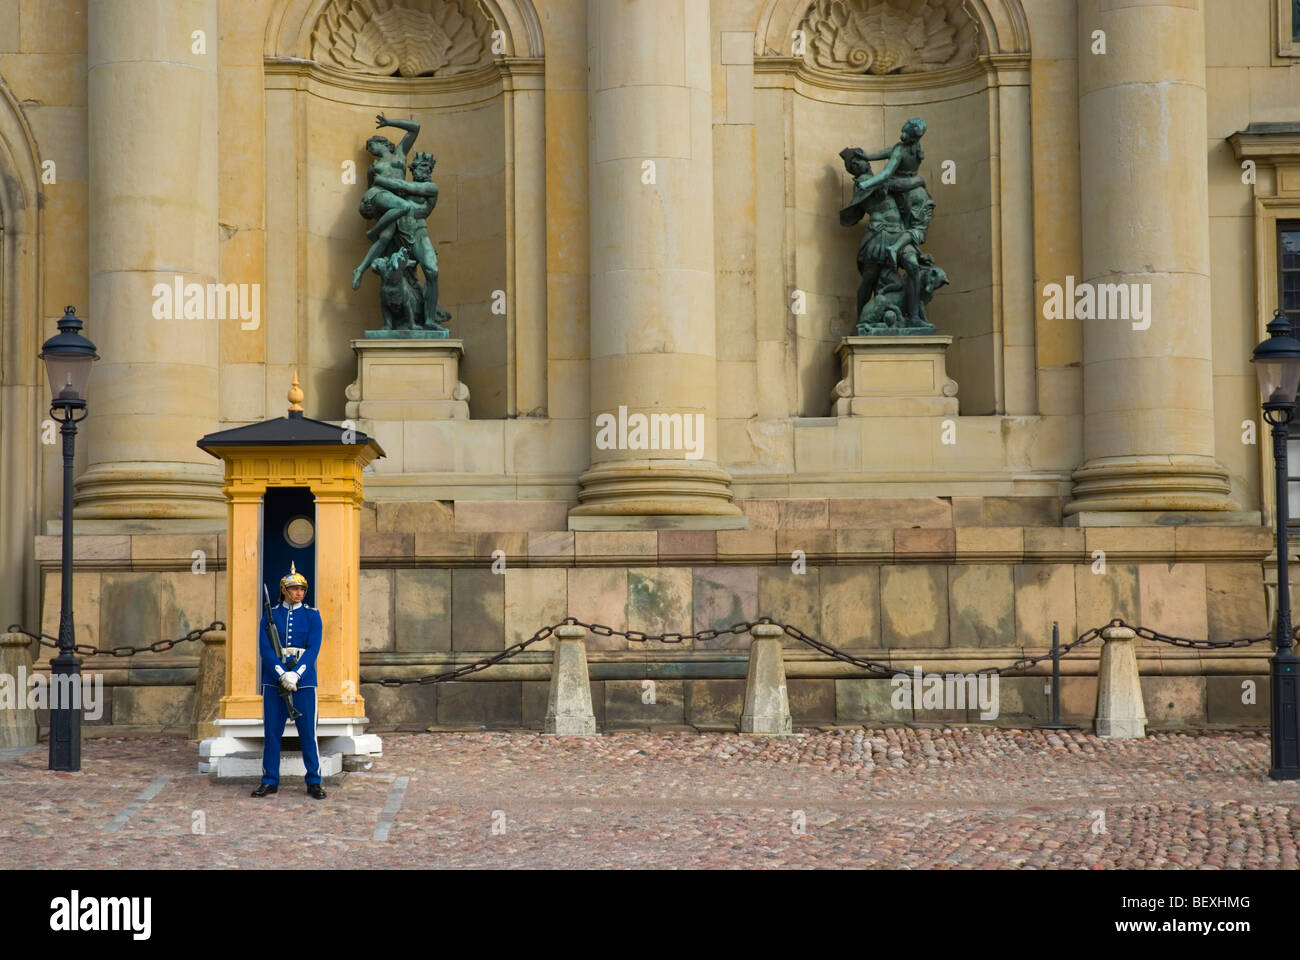 Kungliga slottet the Royal Palace exterior Gamla Stan the old town of Stockholm Sweden Europe Stock Photo